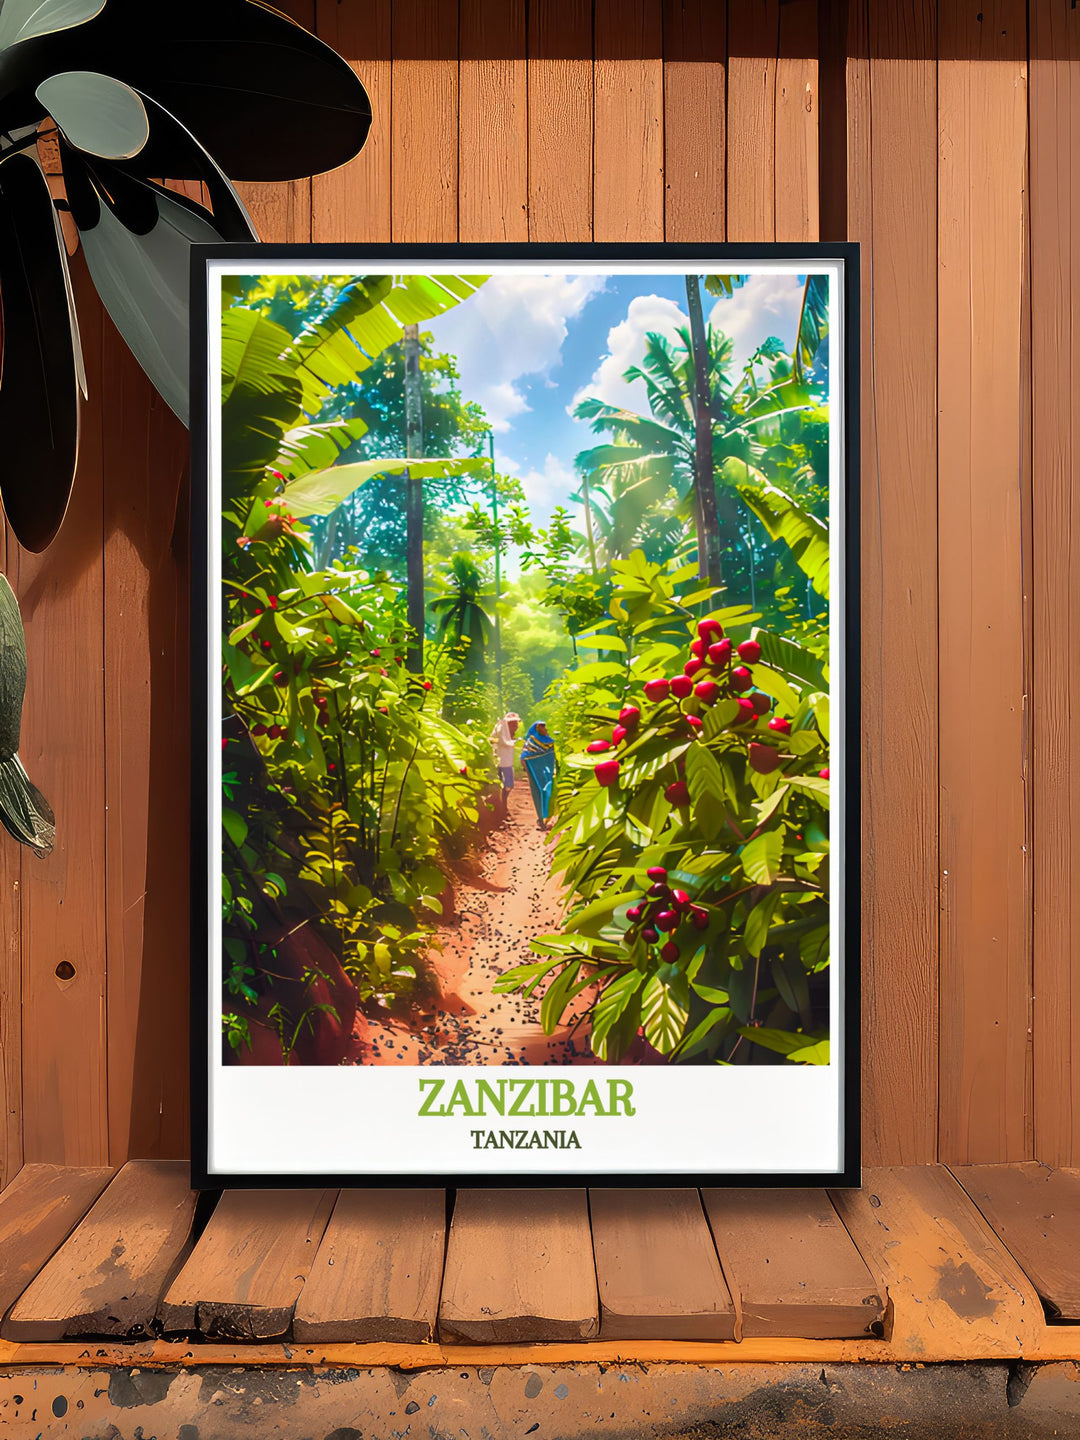 High quality Spice Farms modern art featuring contemporary designs of Zanzibars spice fields perfect for those who appreciate stylish and nature inspired decor with prints that stand out in any room.